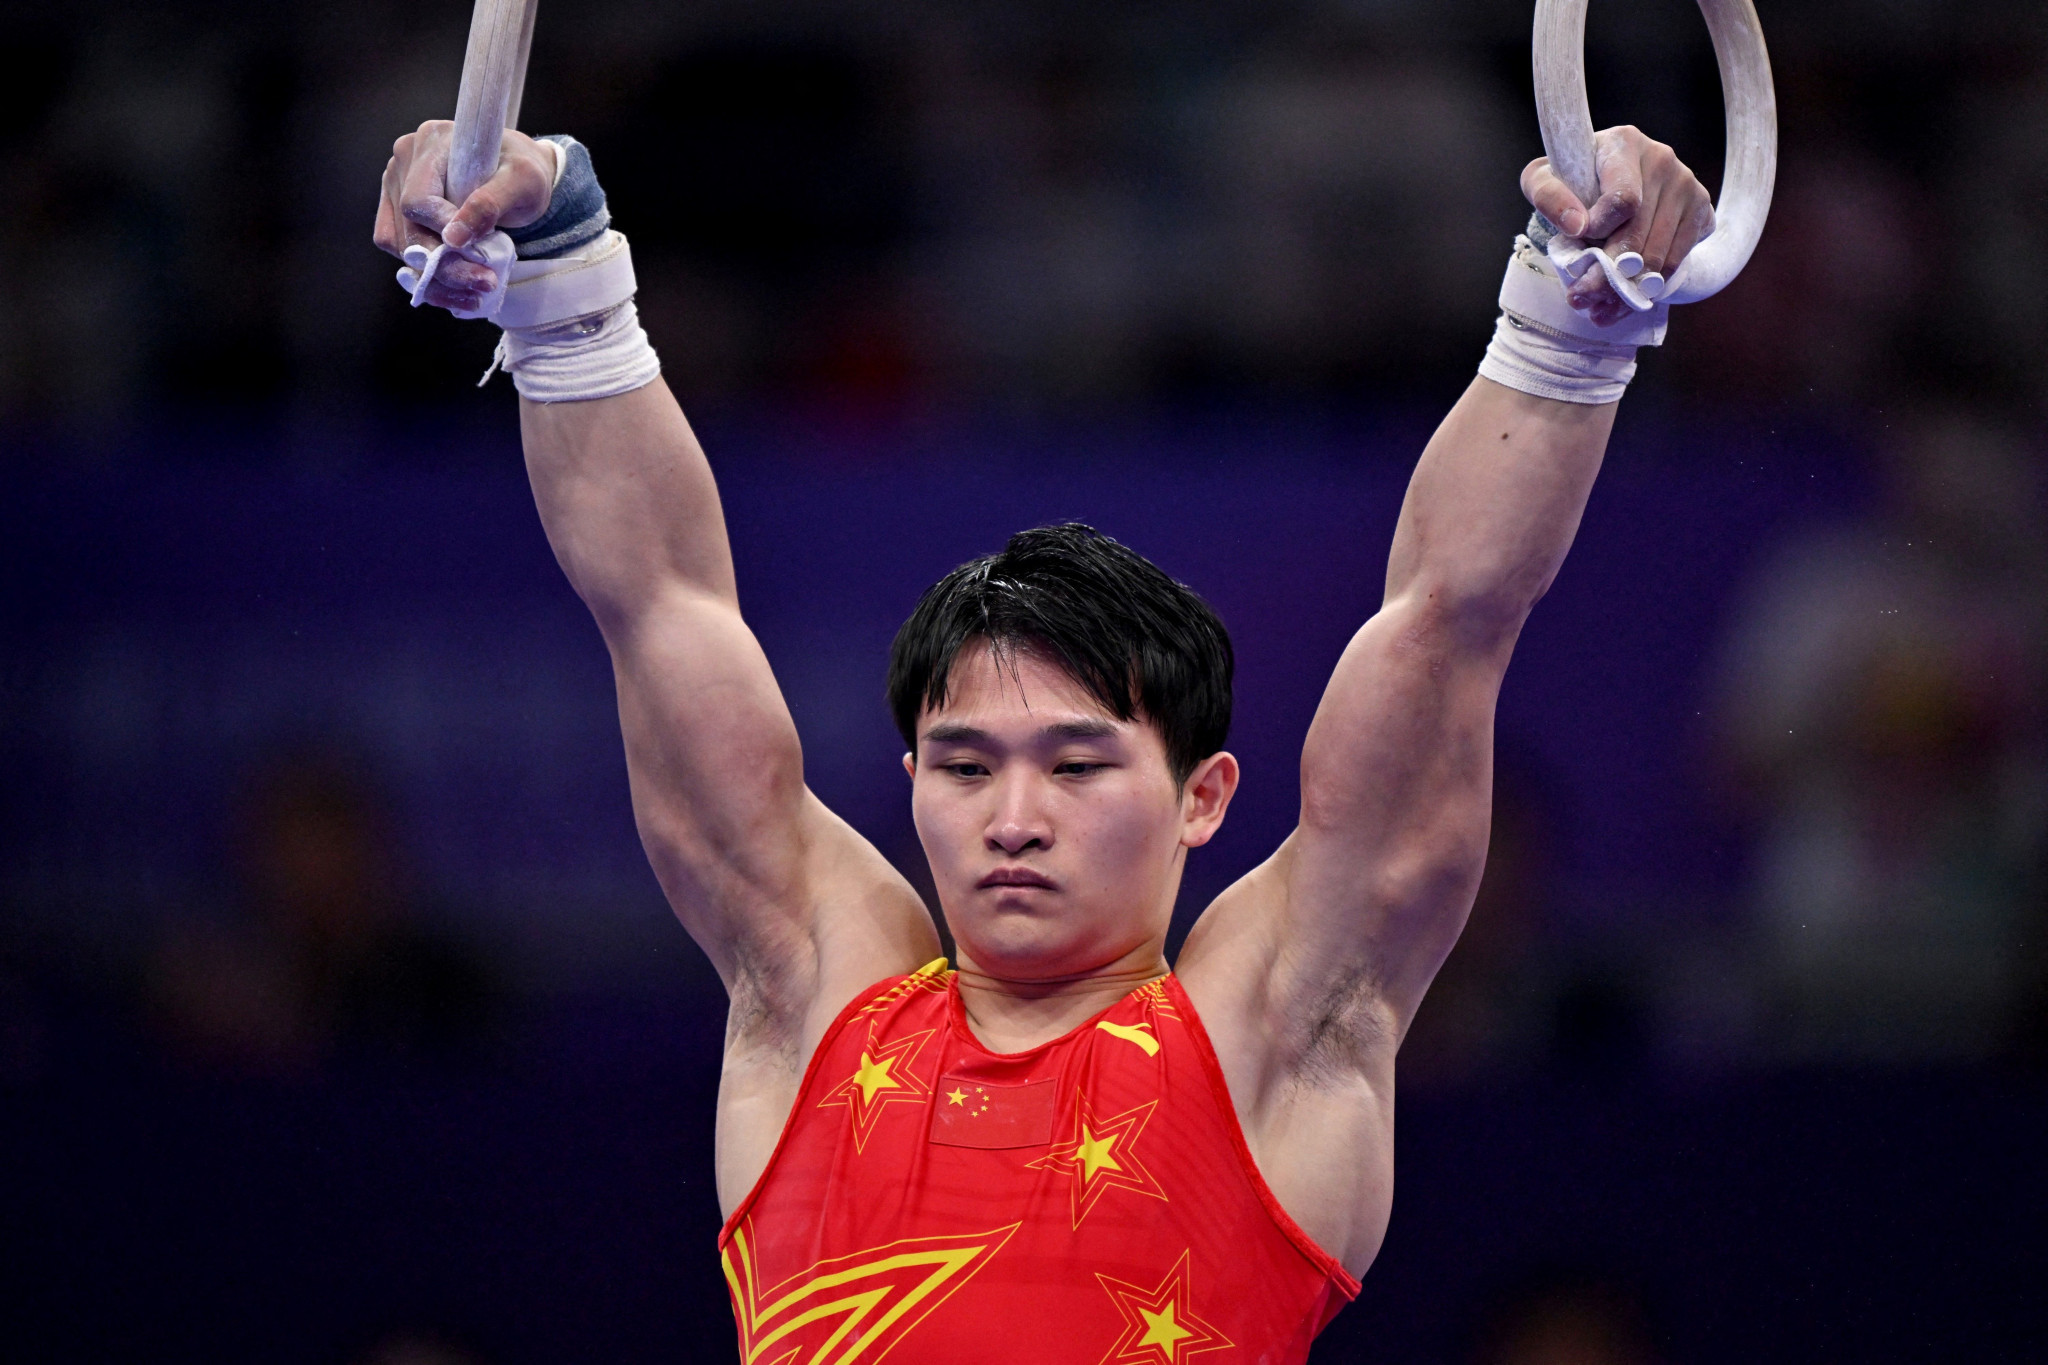 Lan Xingyu, the 2021 world champion, secured the men's rings gold medal with a score of 15.433 ©Getty Images